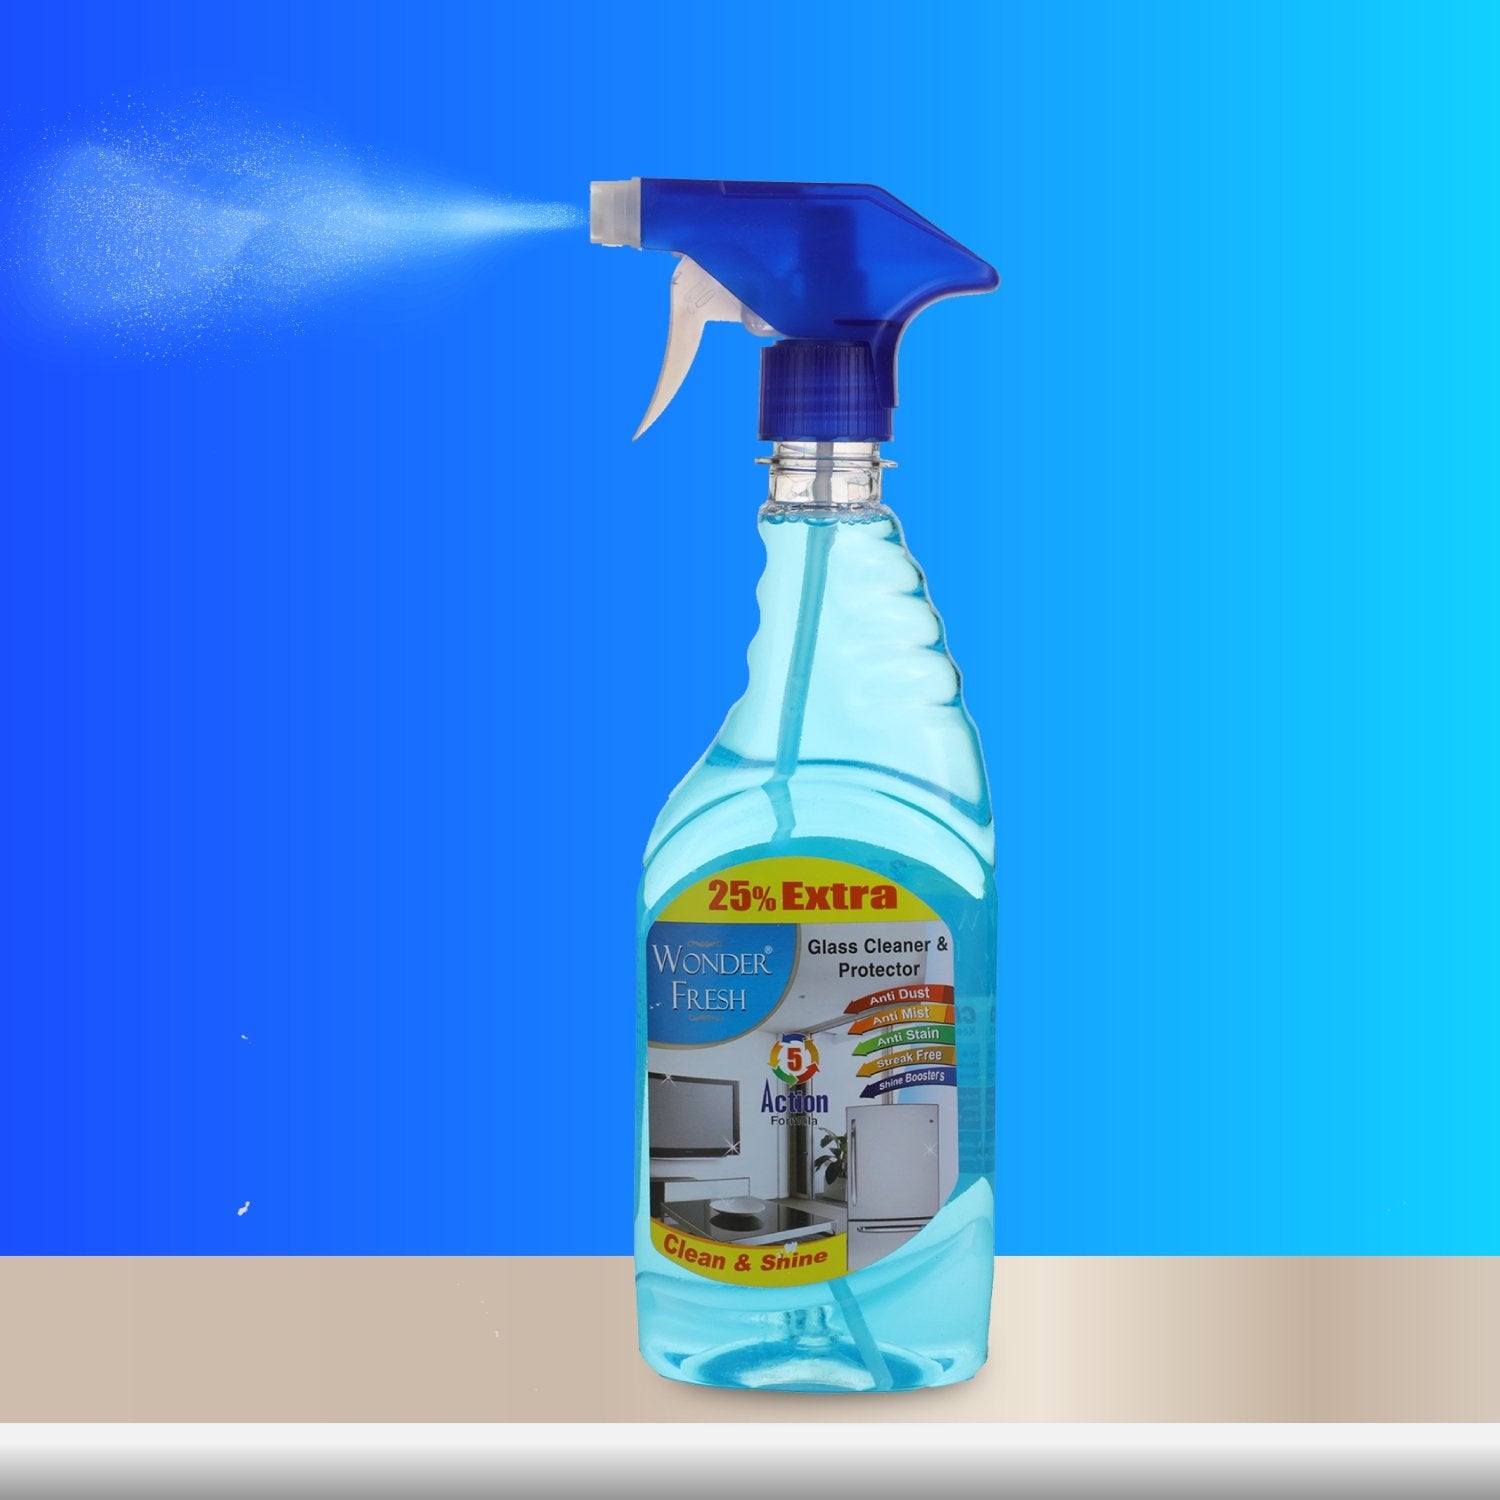 1329 Glass Cleaner and Protector Spray (500  ml) - SkyShopy